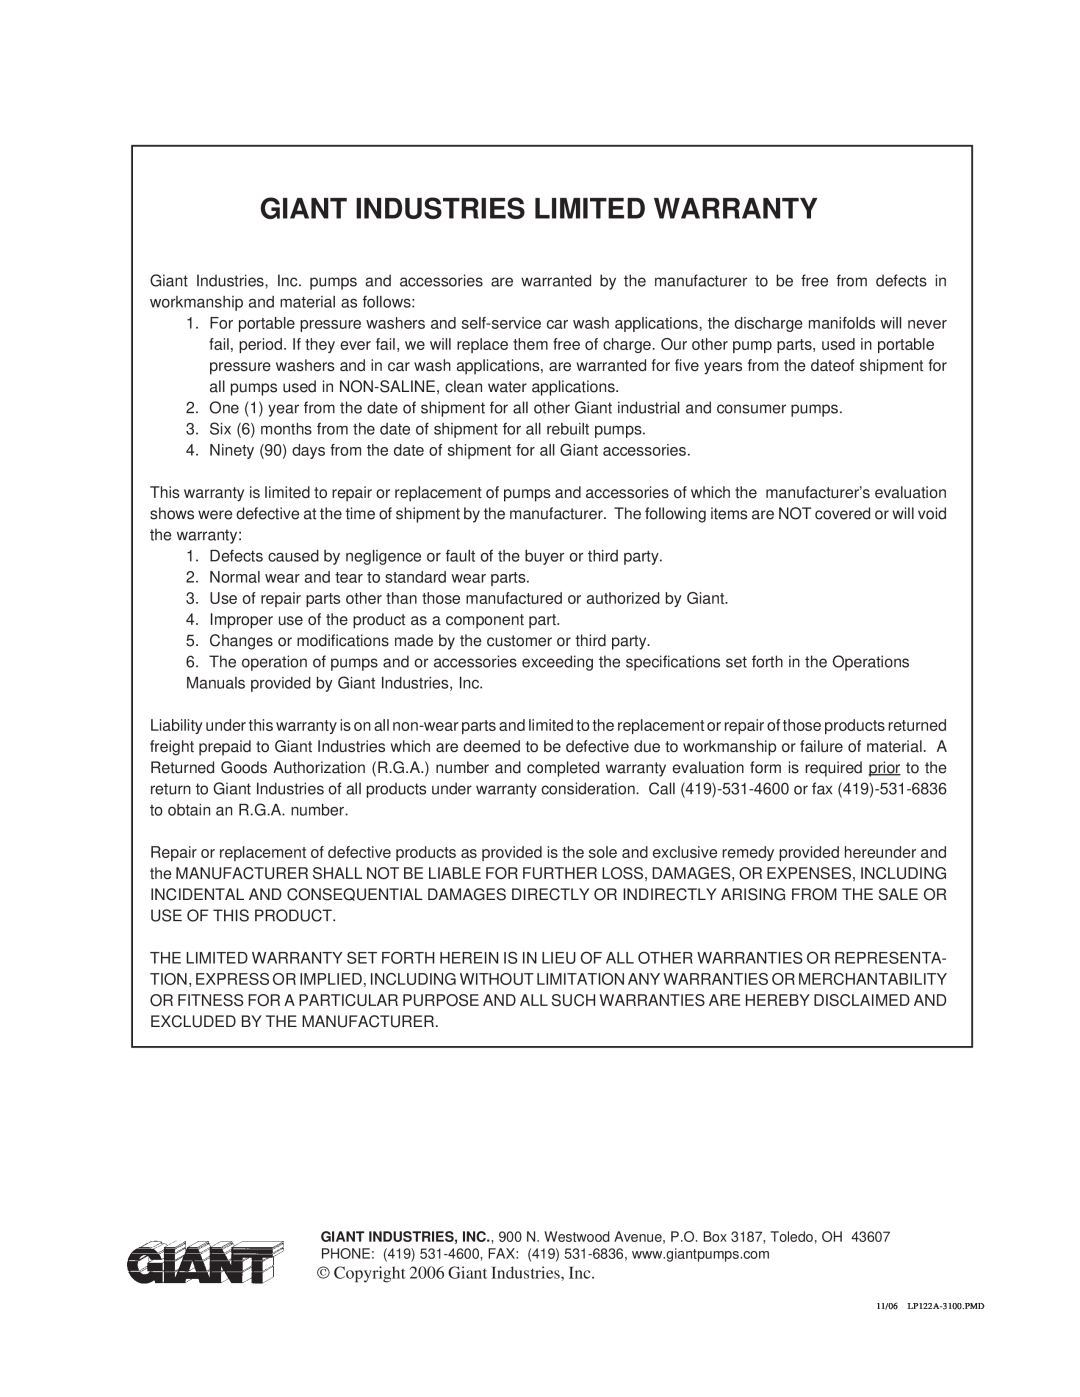 Giant LP122A-3100 operating instructions Giant Industries Limited Warranty,  Copyright 2006 Giant Industries, Inc 